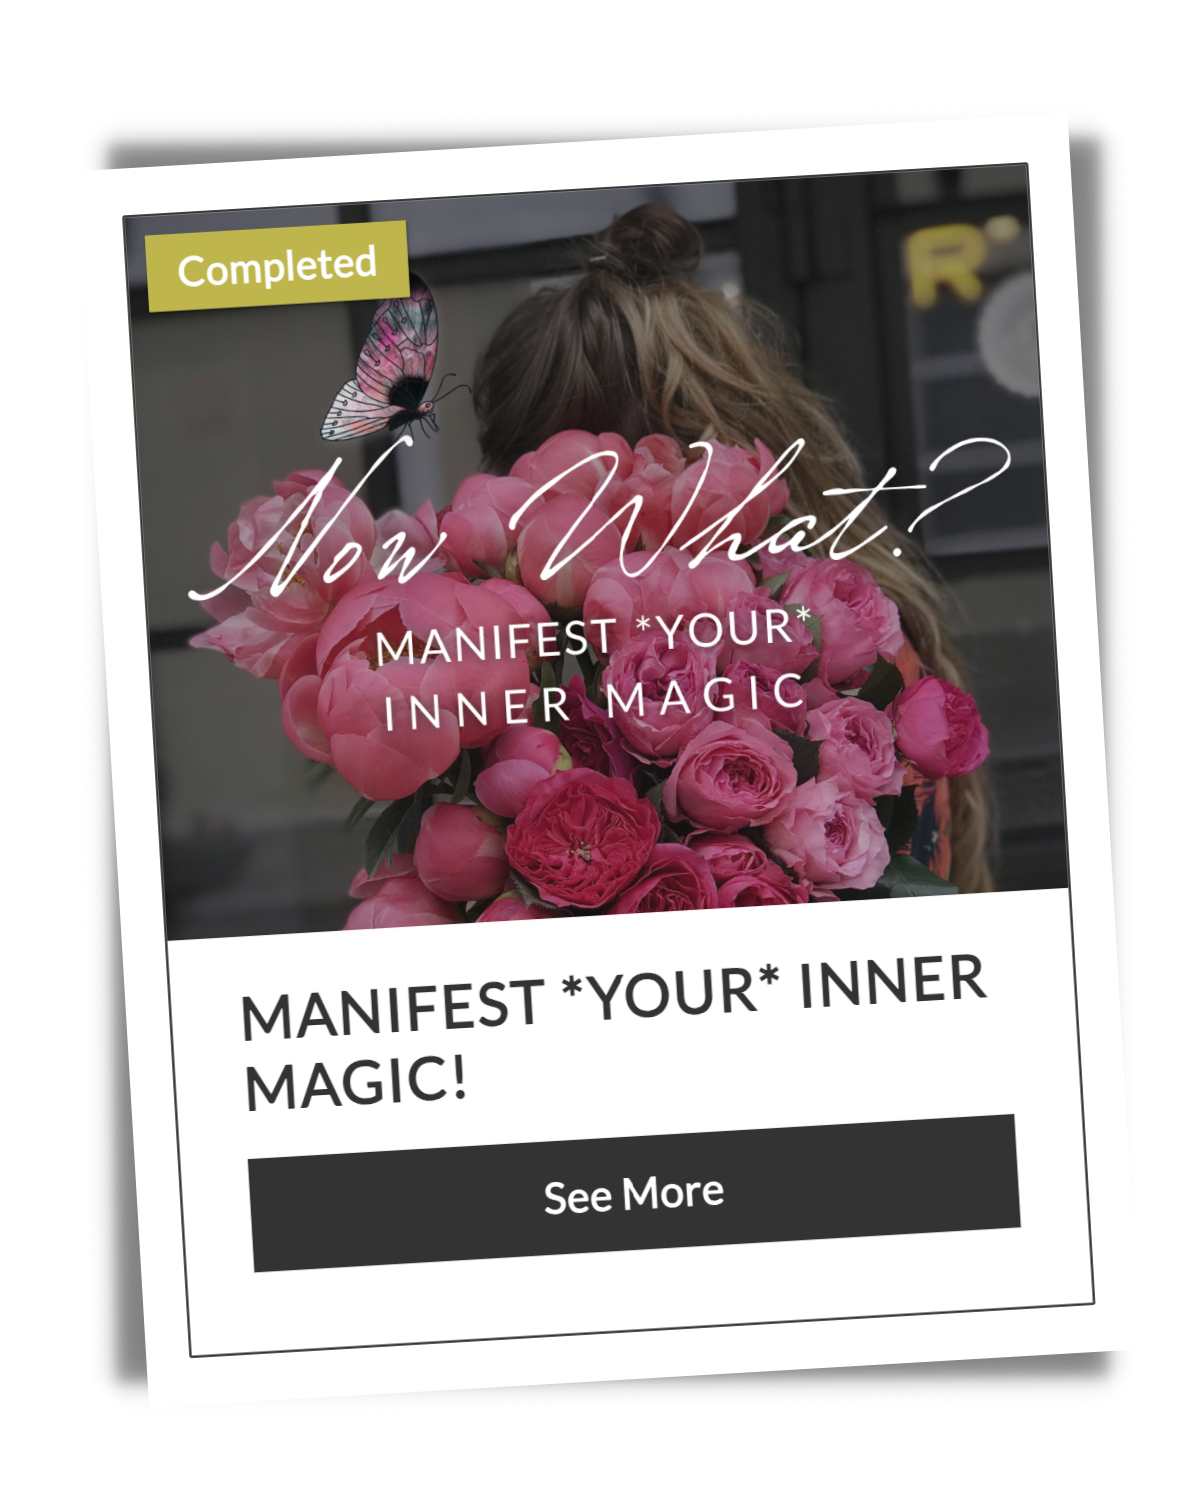 The Space: Now What? Manifest with Flowers for Blooming Brightly